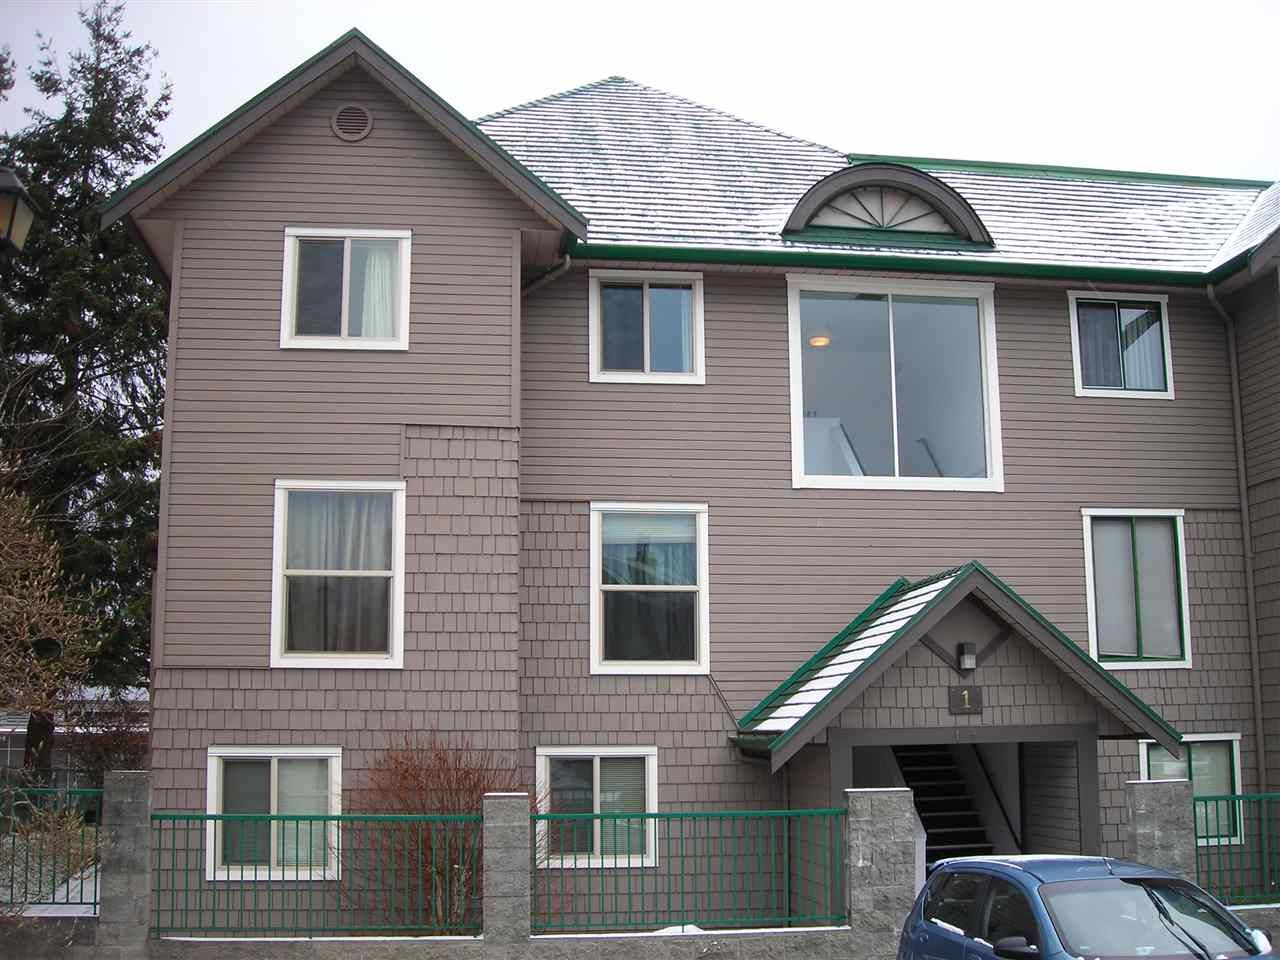 Main Photo: Map location: 1 622 FARNHAM Road in Gibsons: Gibsons & Area Condo for sale (Sunshine Coast)  : MLS®# R2128861